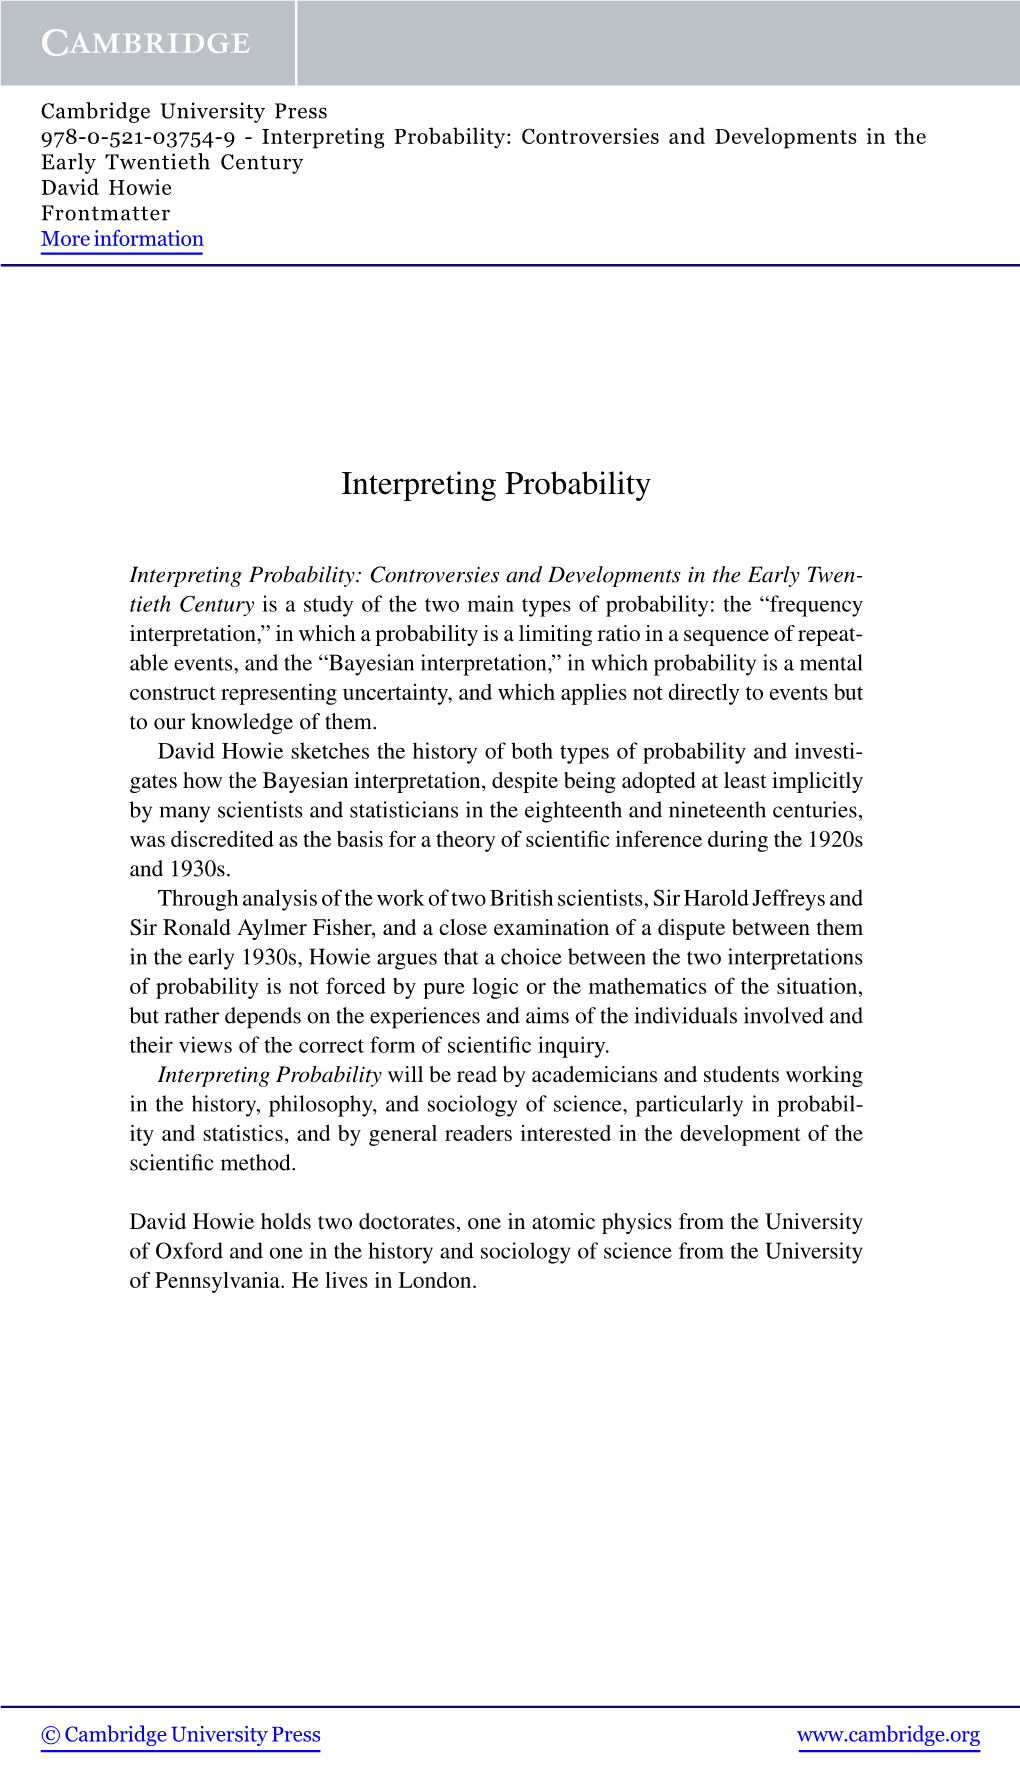 Interpreting Probability: Controversies and Developments in the Early Twentieth Century David Howie Frontmatter More Information